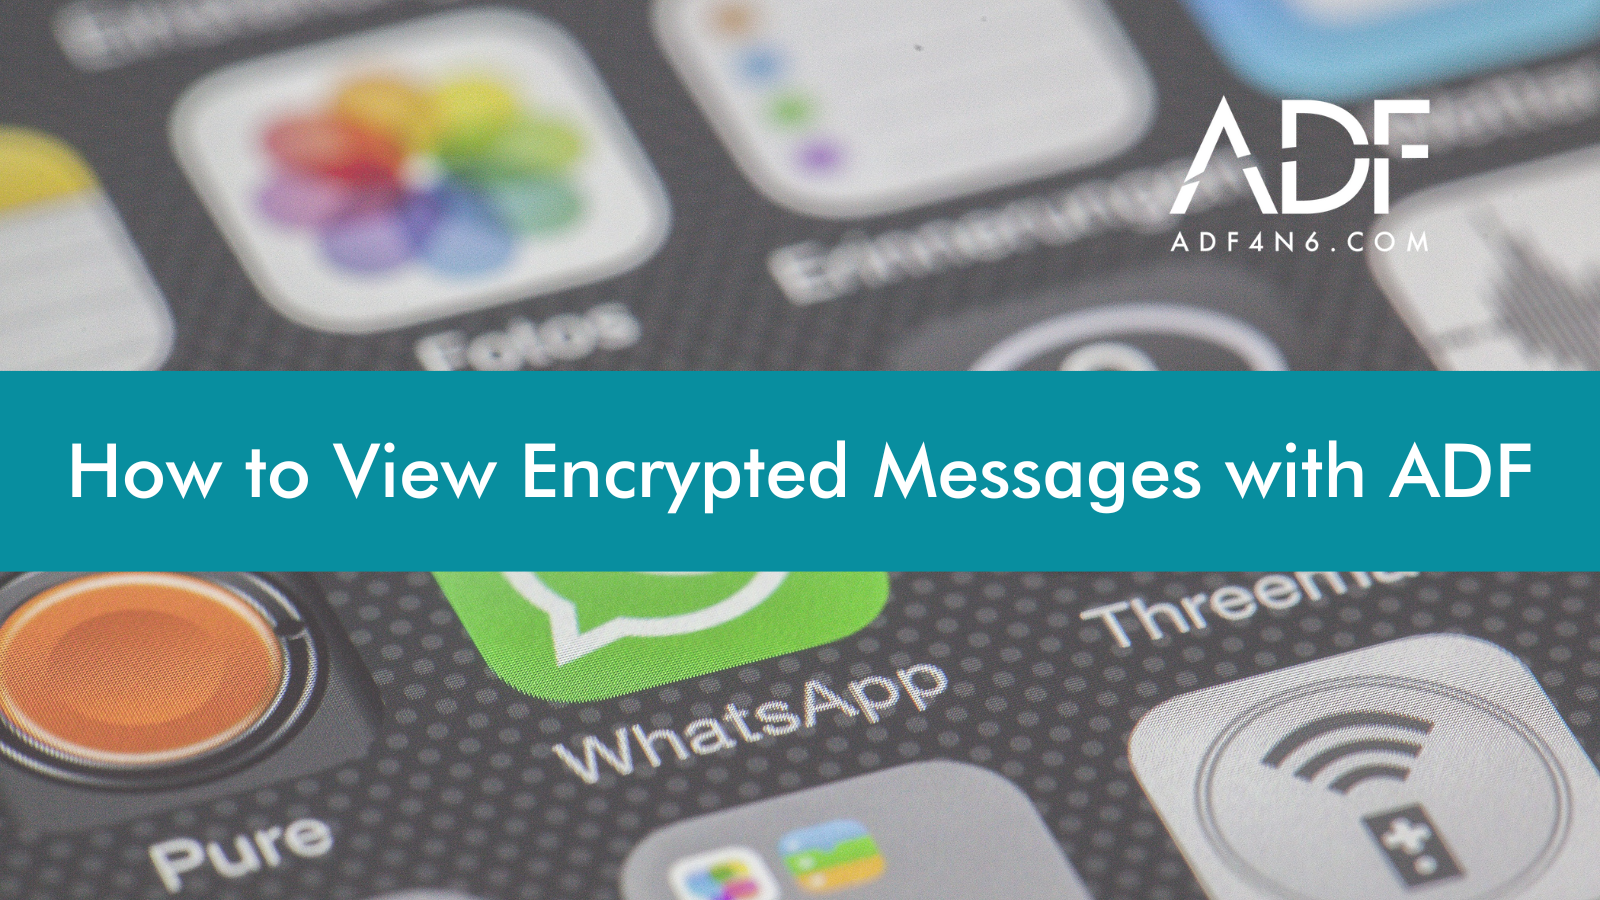 How to View Encrypted Messages with ADF